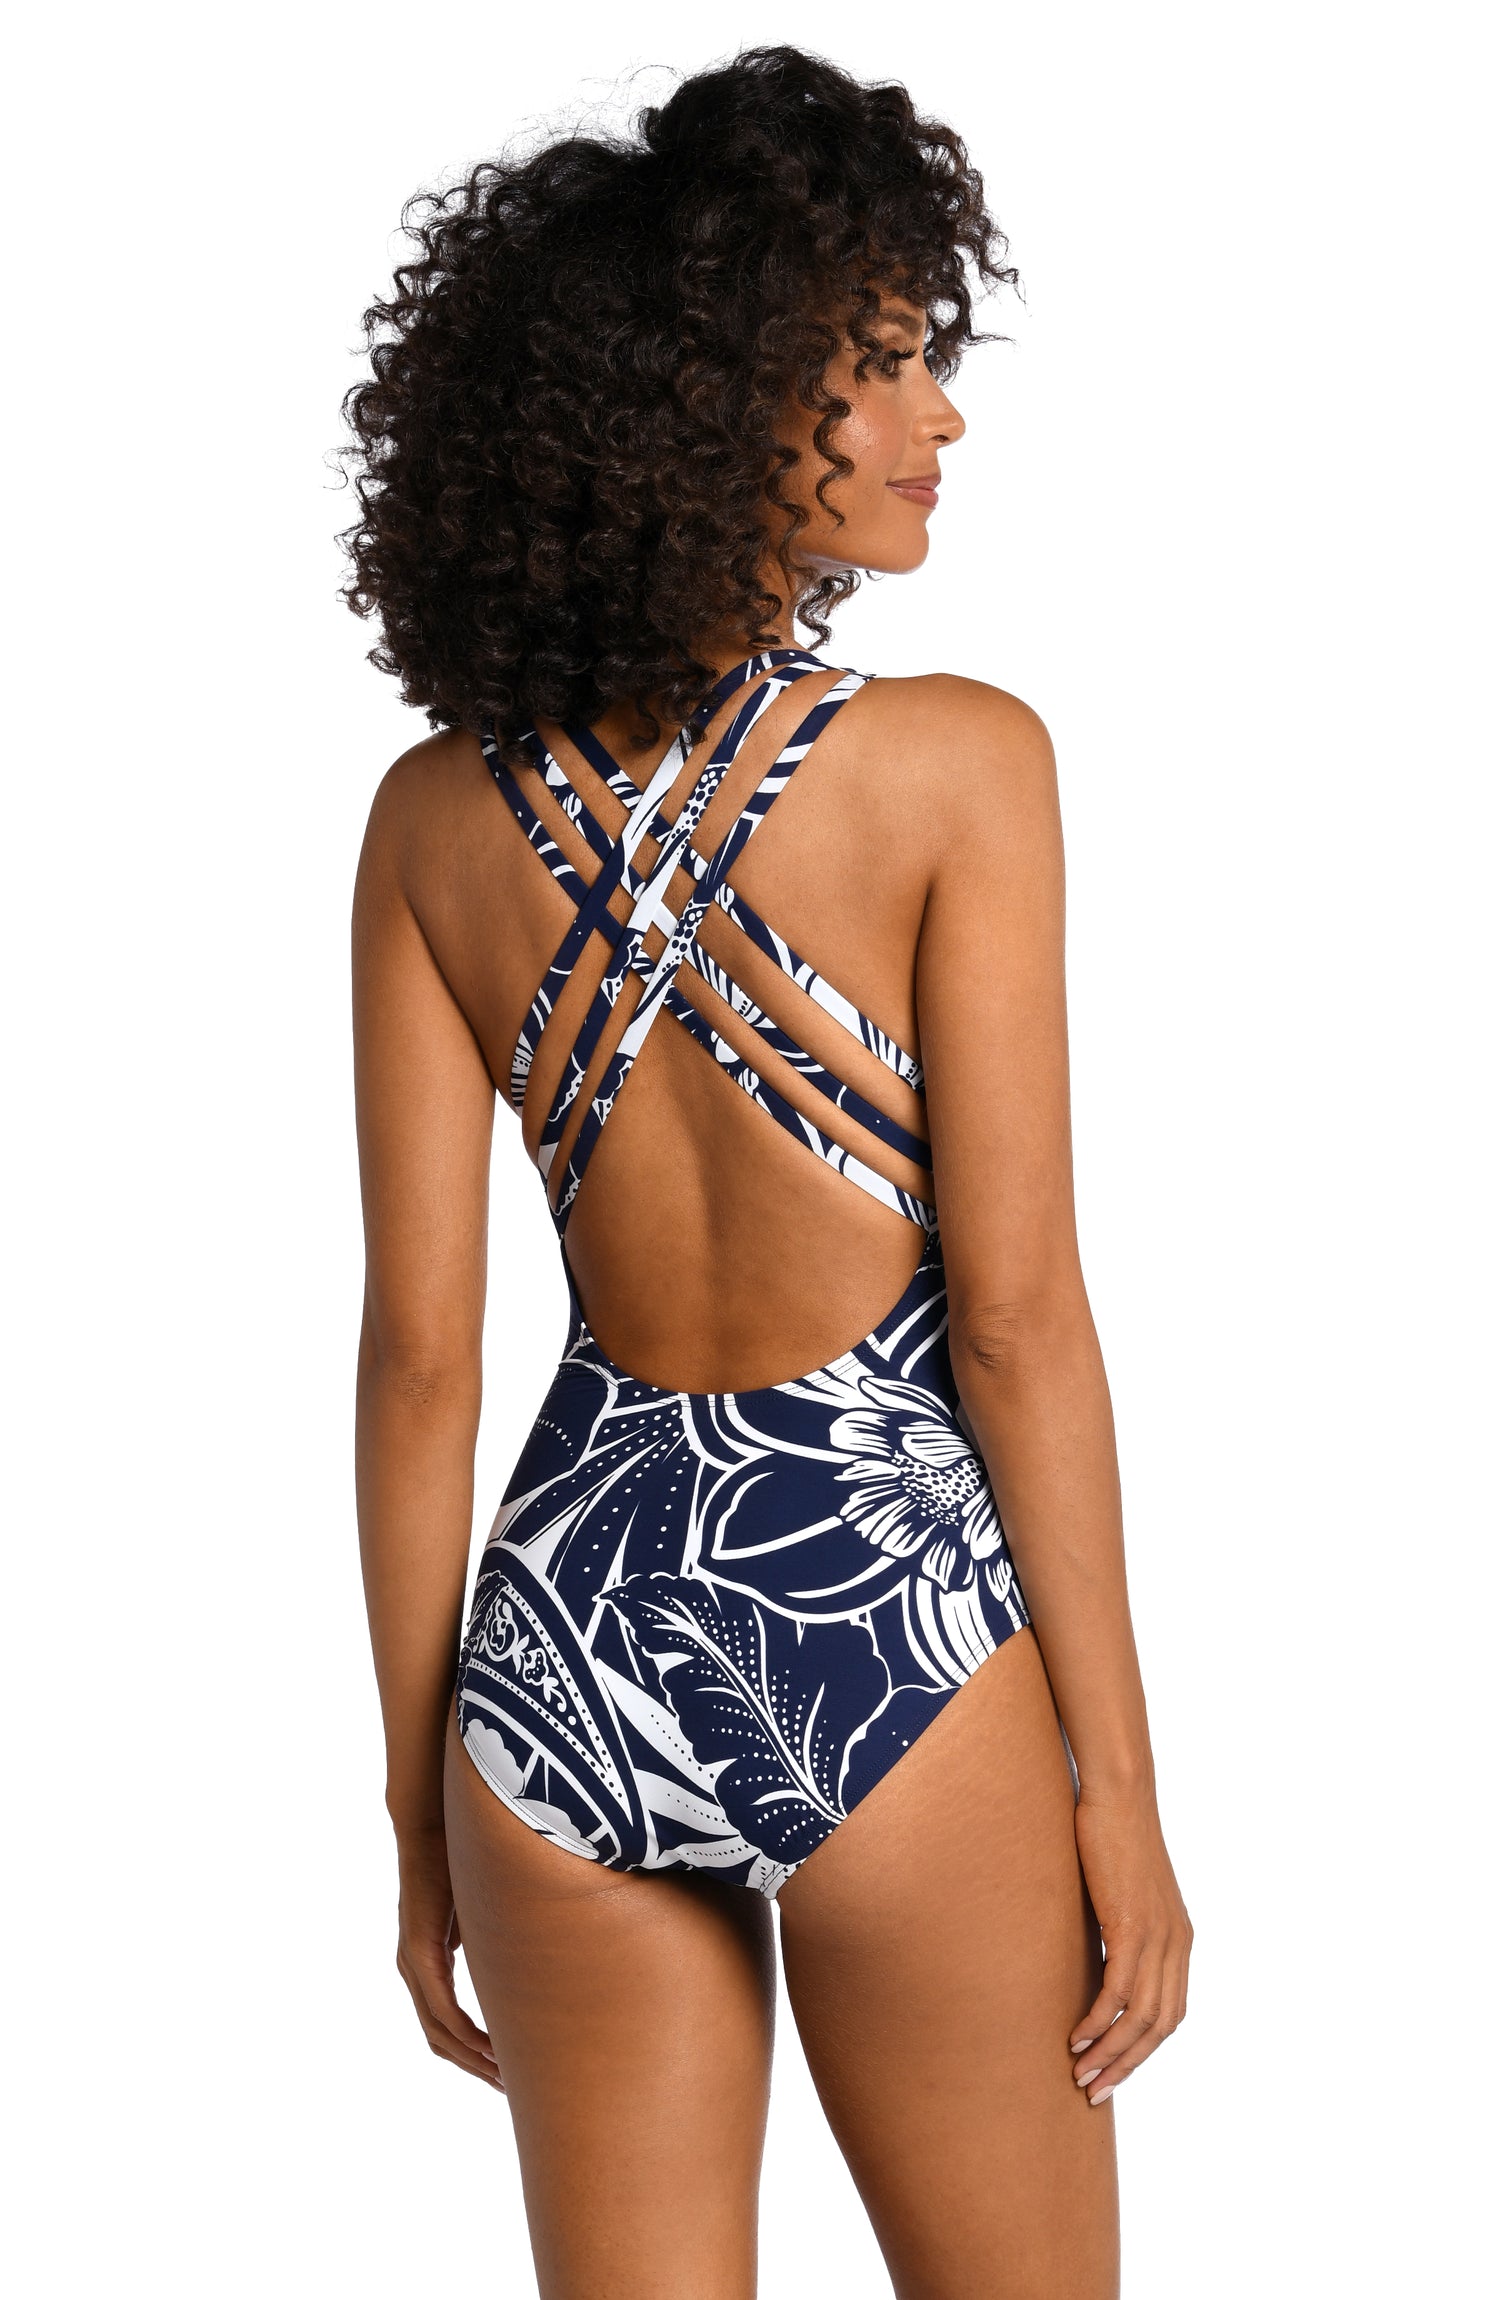 Model is wearing an indigo colored print with pops of white on this multi-strap crossback one piece from our At the Playa collection!